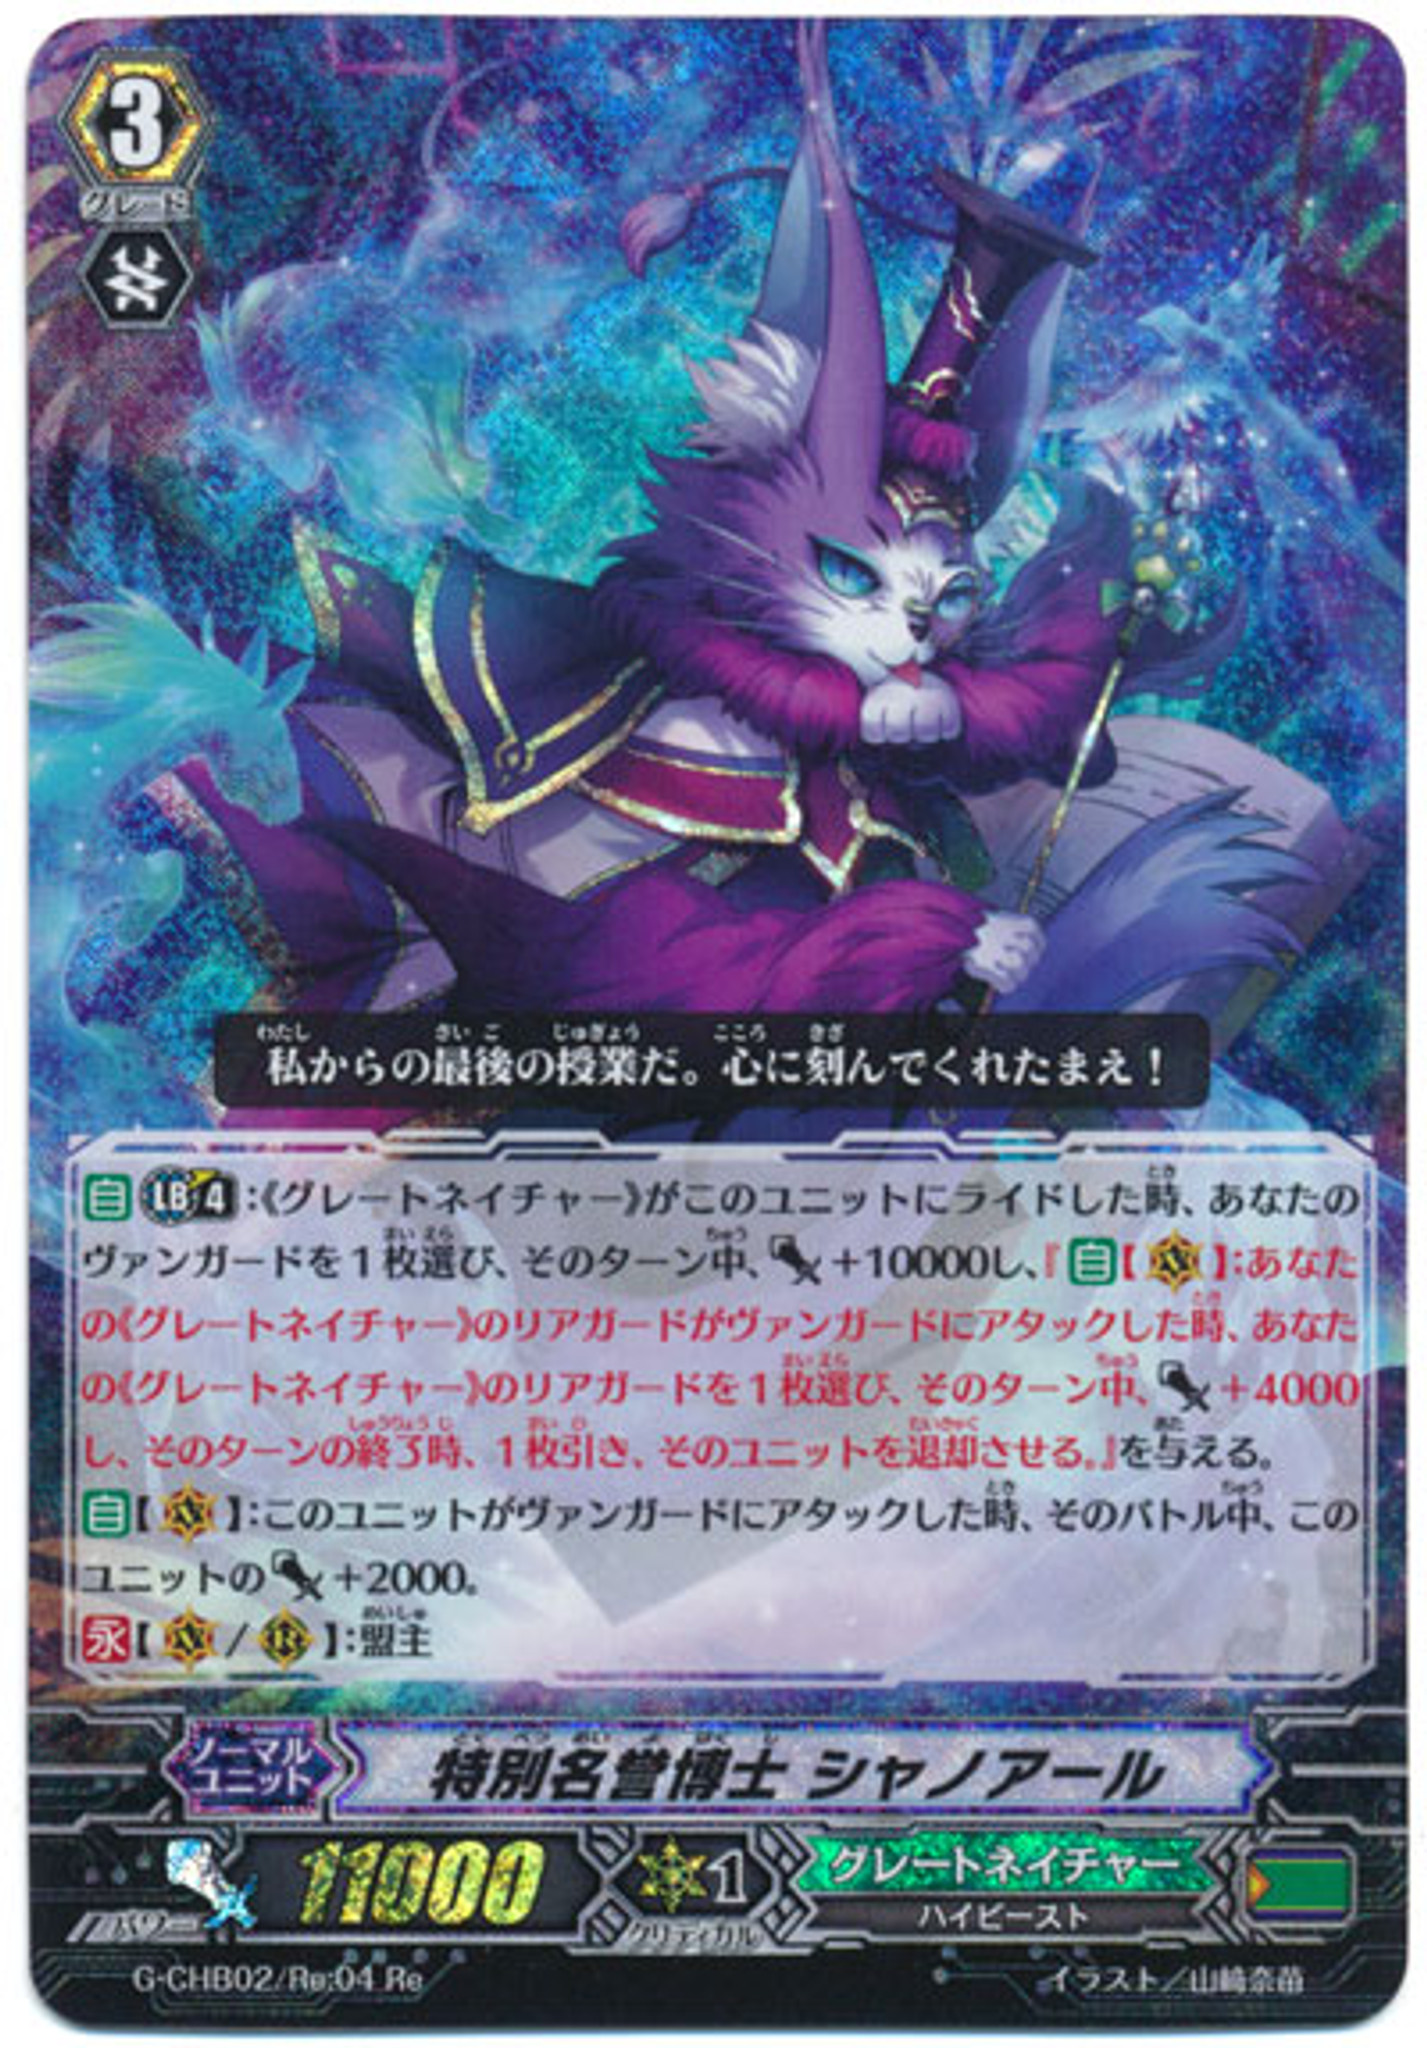 CardFight Vanguard Character 2 WE ARE!!! TRINITY Honorary Professor, G-CHB02/Re04